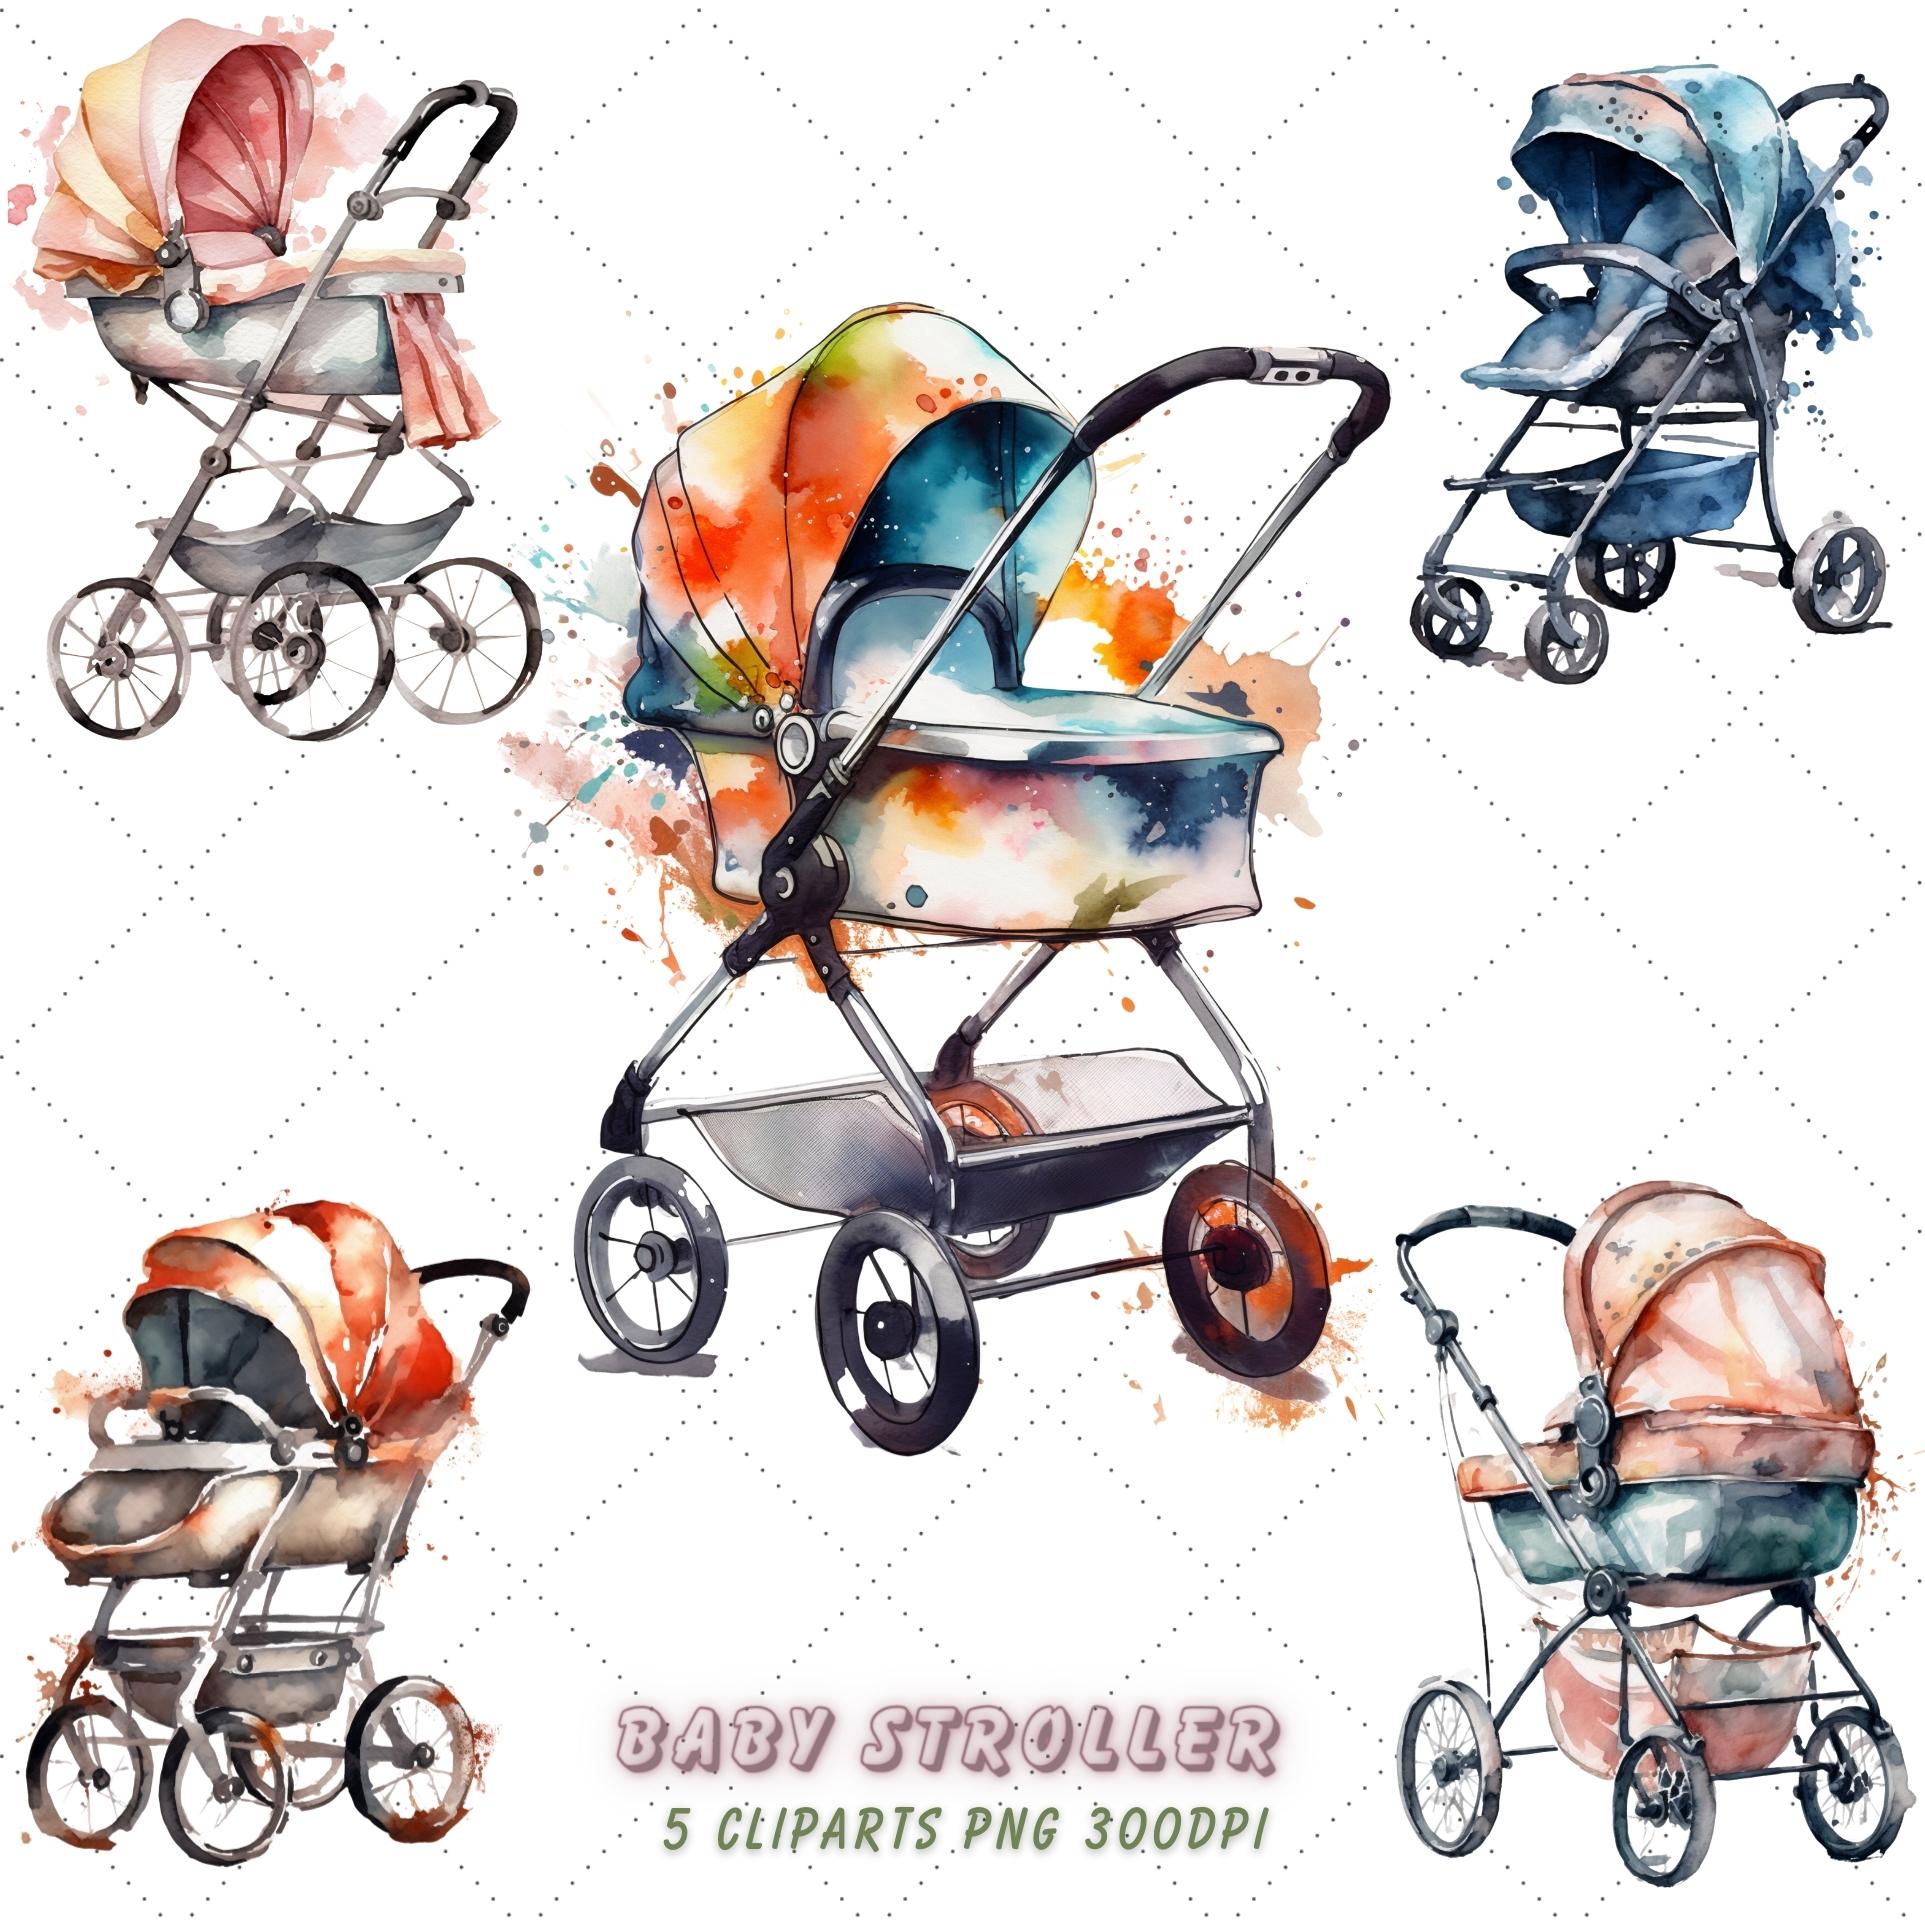 Baby Stroller Watercolor Clipart Bundle, Transparent PNG cover image.